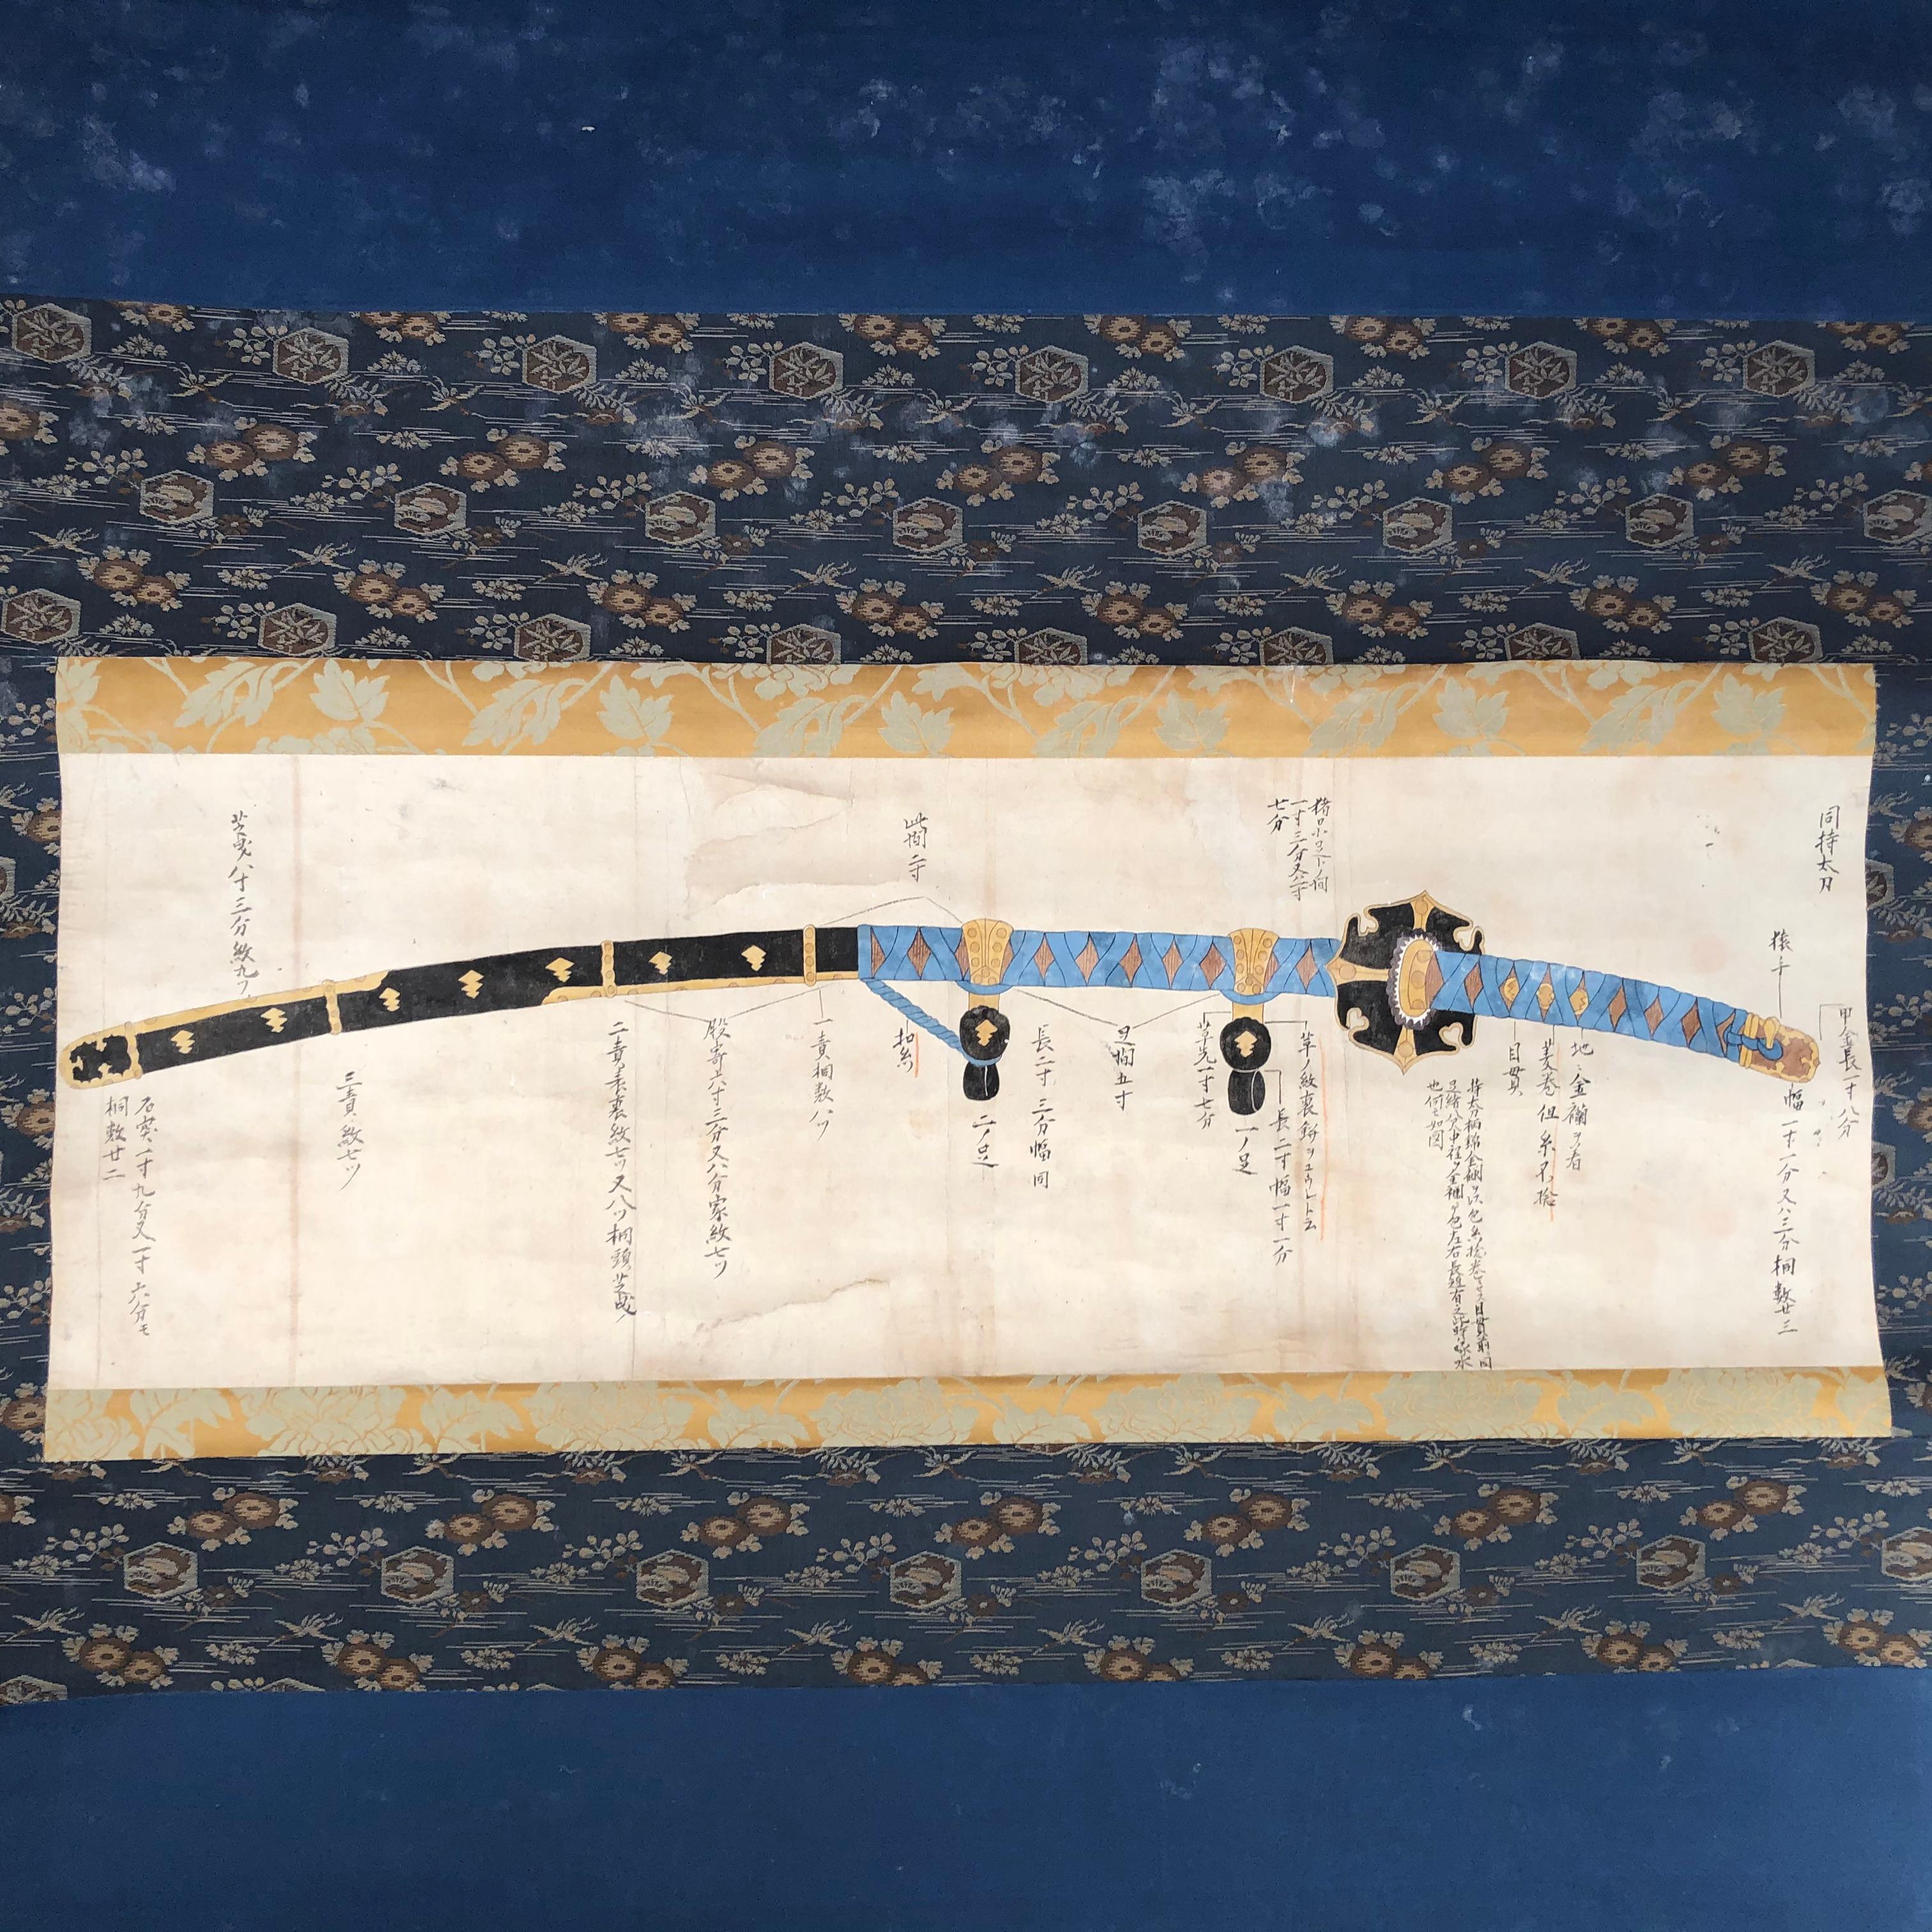 A rare gem seldom available, even in Japan.

A very fine and impressive Japanese antique hand painted paper scroll of a detailed samurai sword- an important blade and robustly depicted with highly detailed descriptions.

Hand painting in vivid